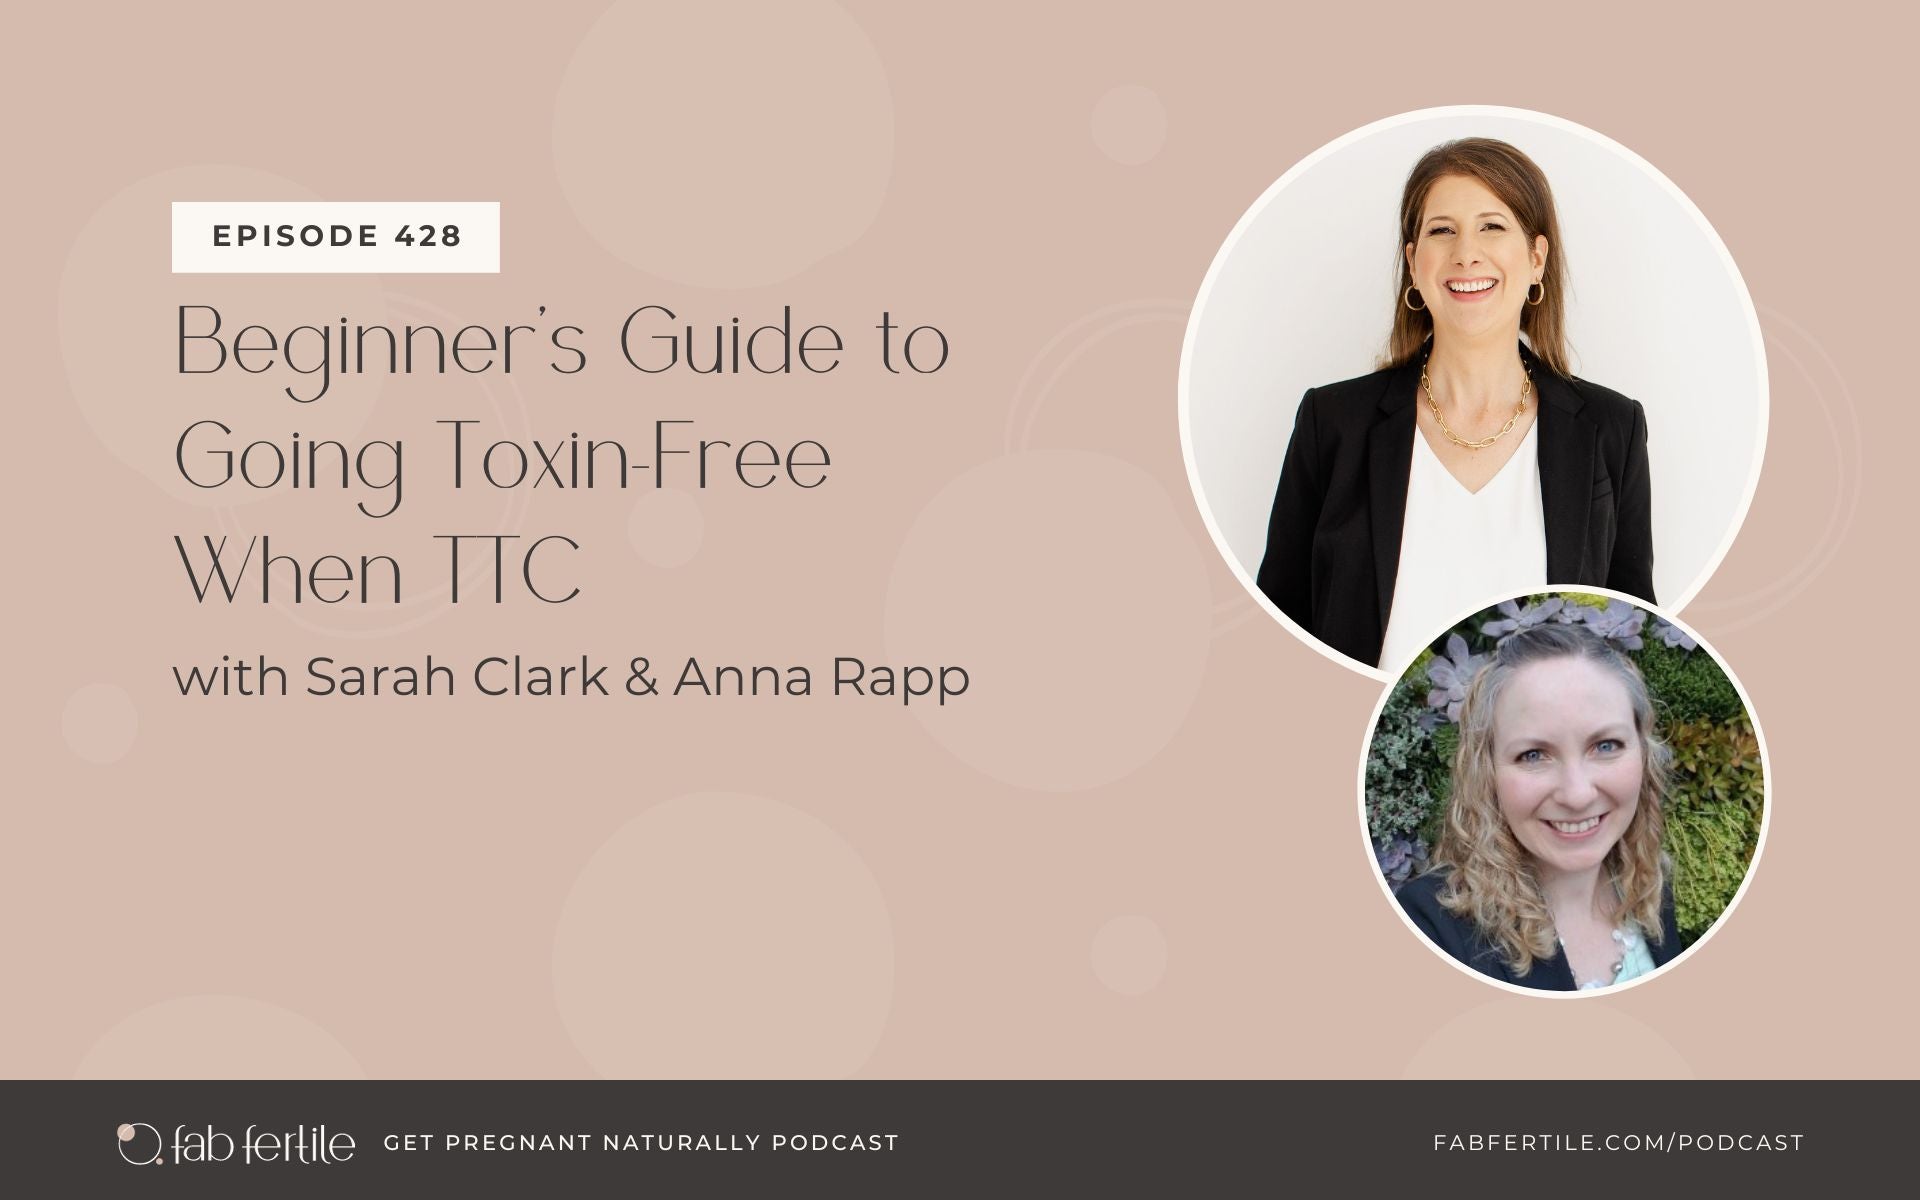 Beginner’s Guide to Going Toxin-Free When TTC with Anna Rapp